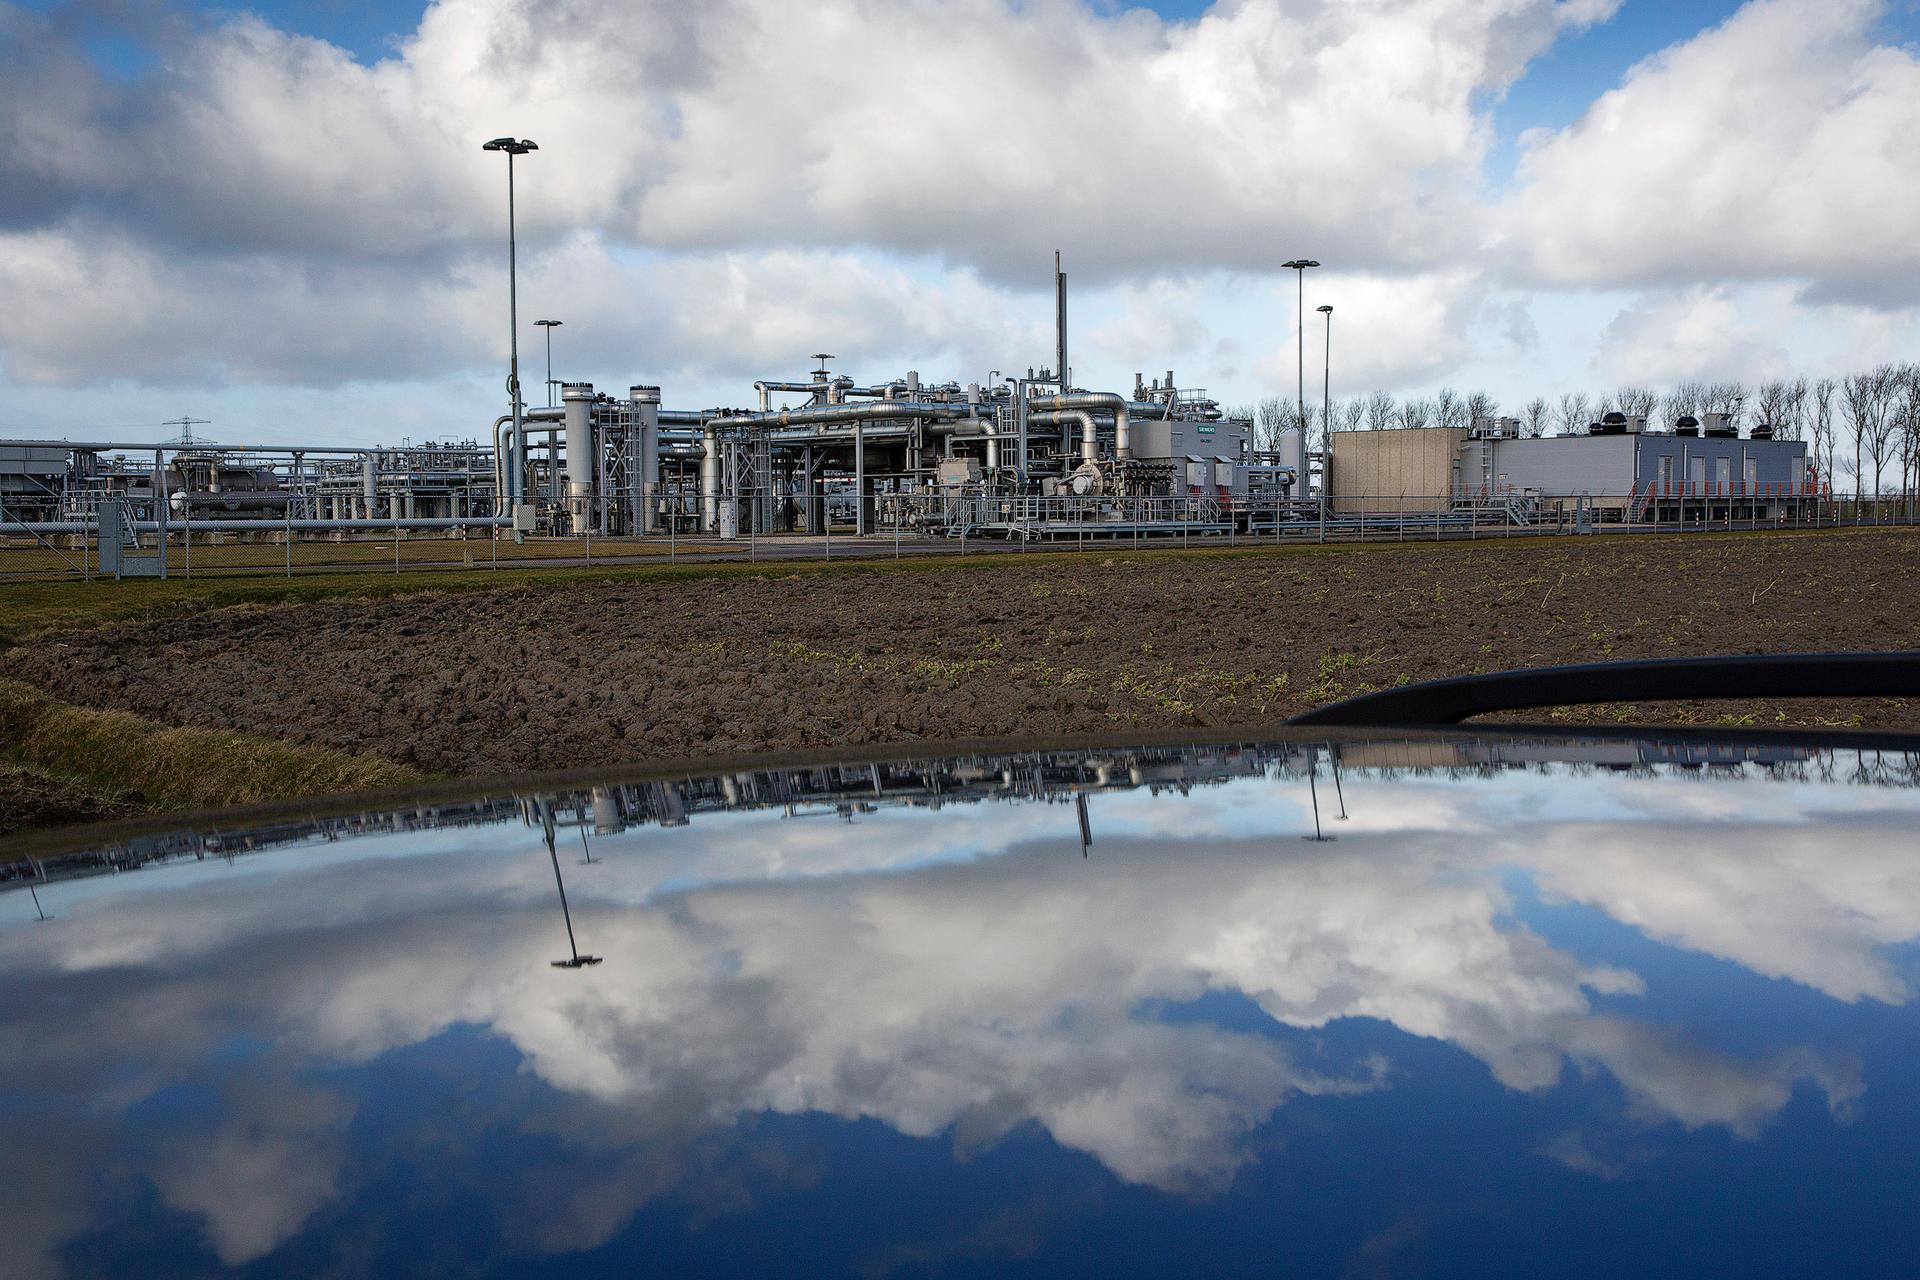 A view of a gas production plant is reflected in the roof of a car in 't Zand in Groningen February 24, 2015